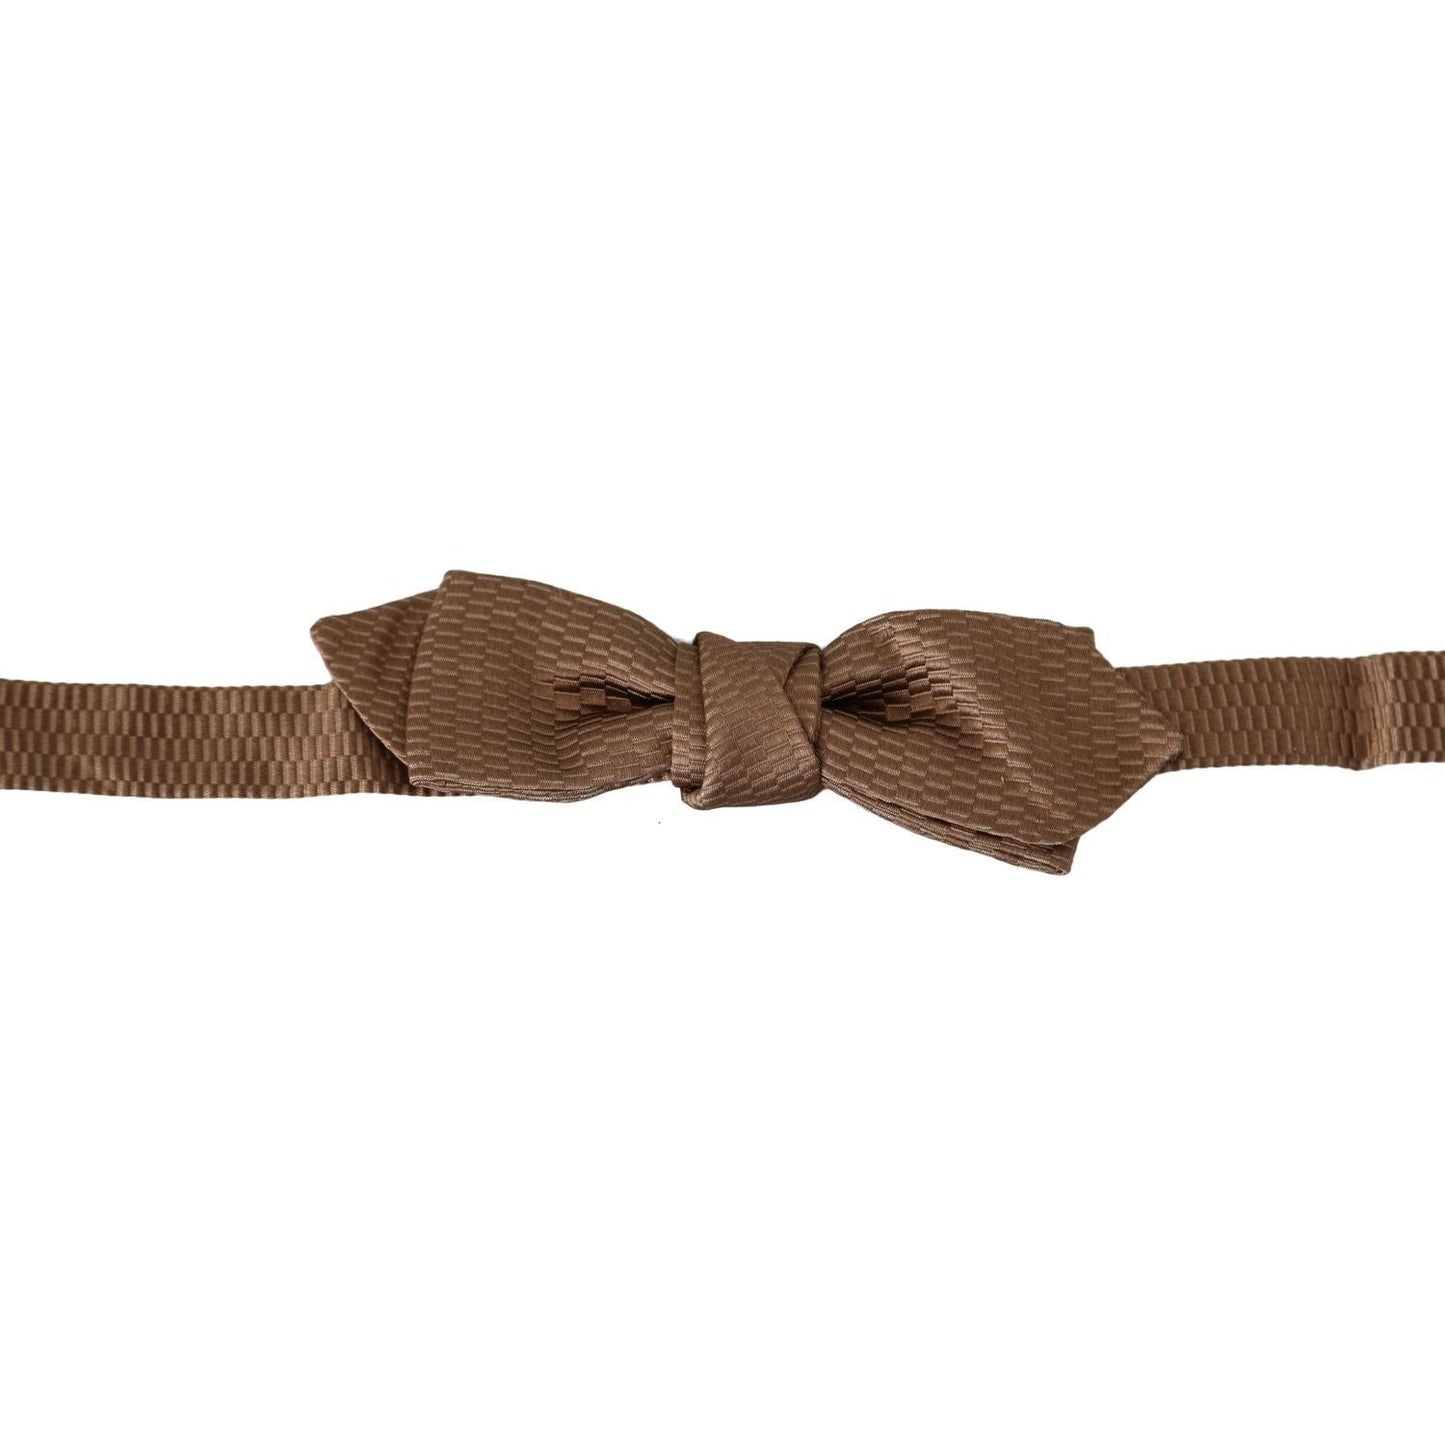 Dolce & Gabbana Elegant Brown Gold Bow Tie Bow Tie men-brown-gold-adjustable-neck-papillon-bow-tie IMG_4271-scaled-39a42c36-9bf.jpg